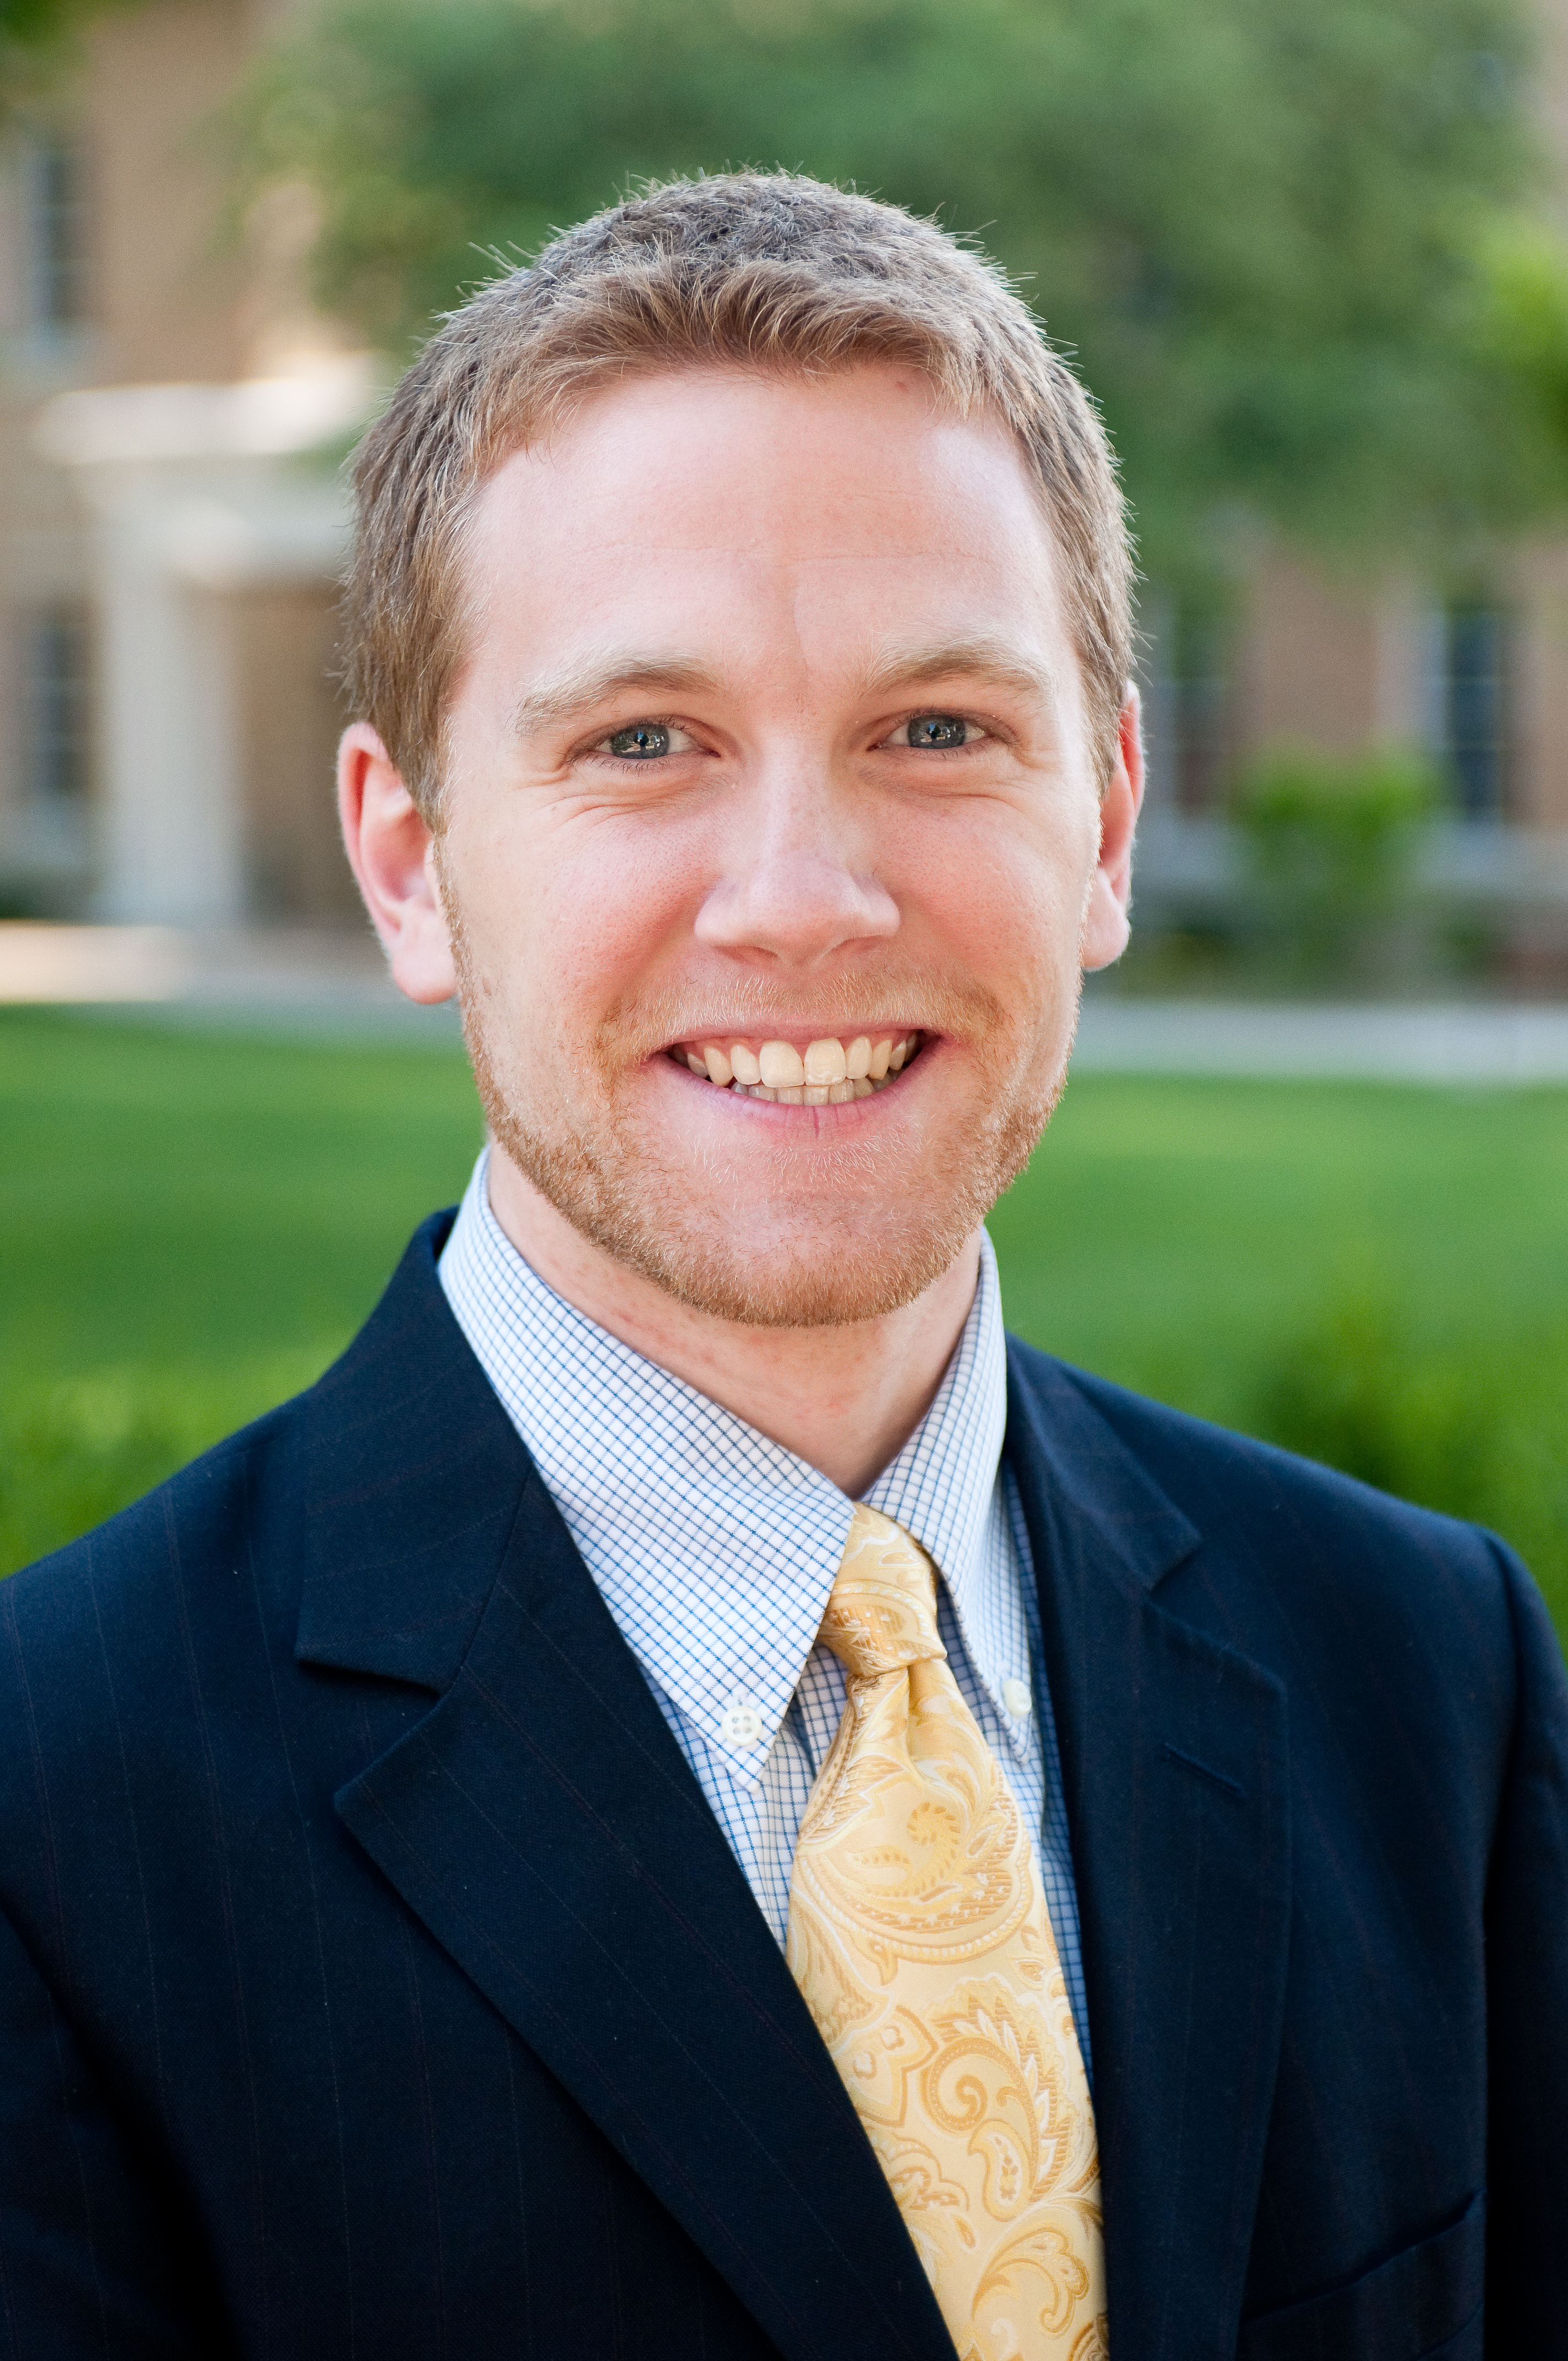 College alum joins theology faculty as visiting professor